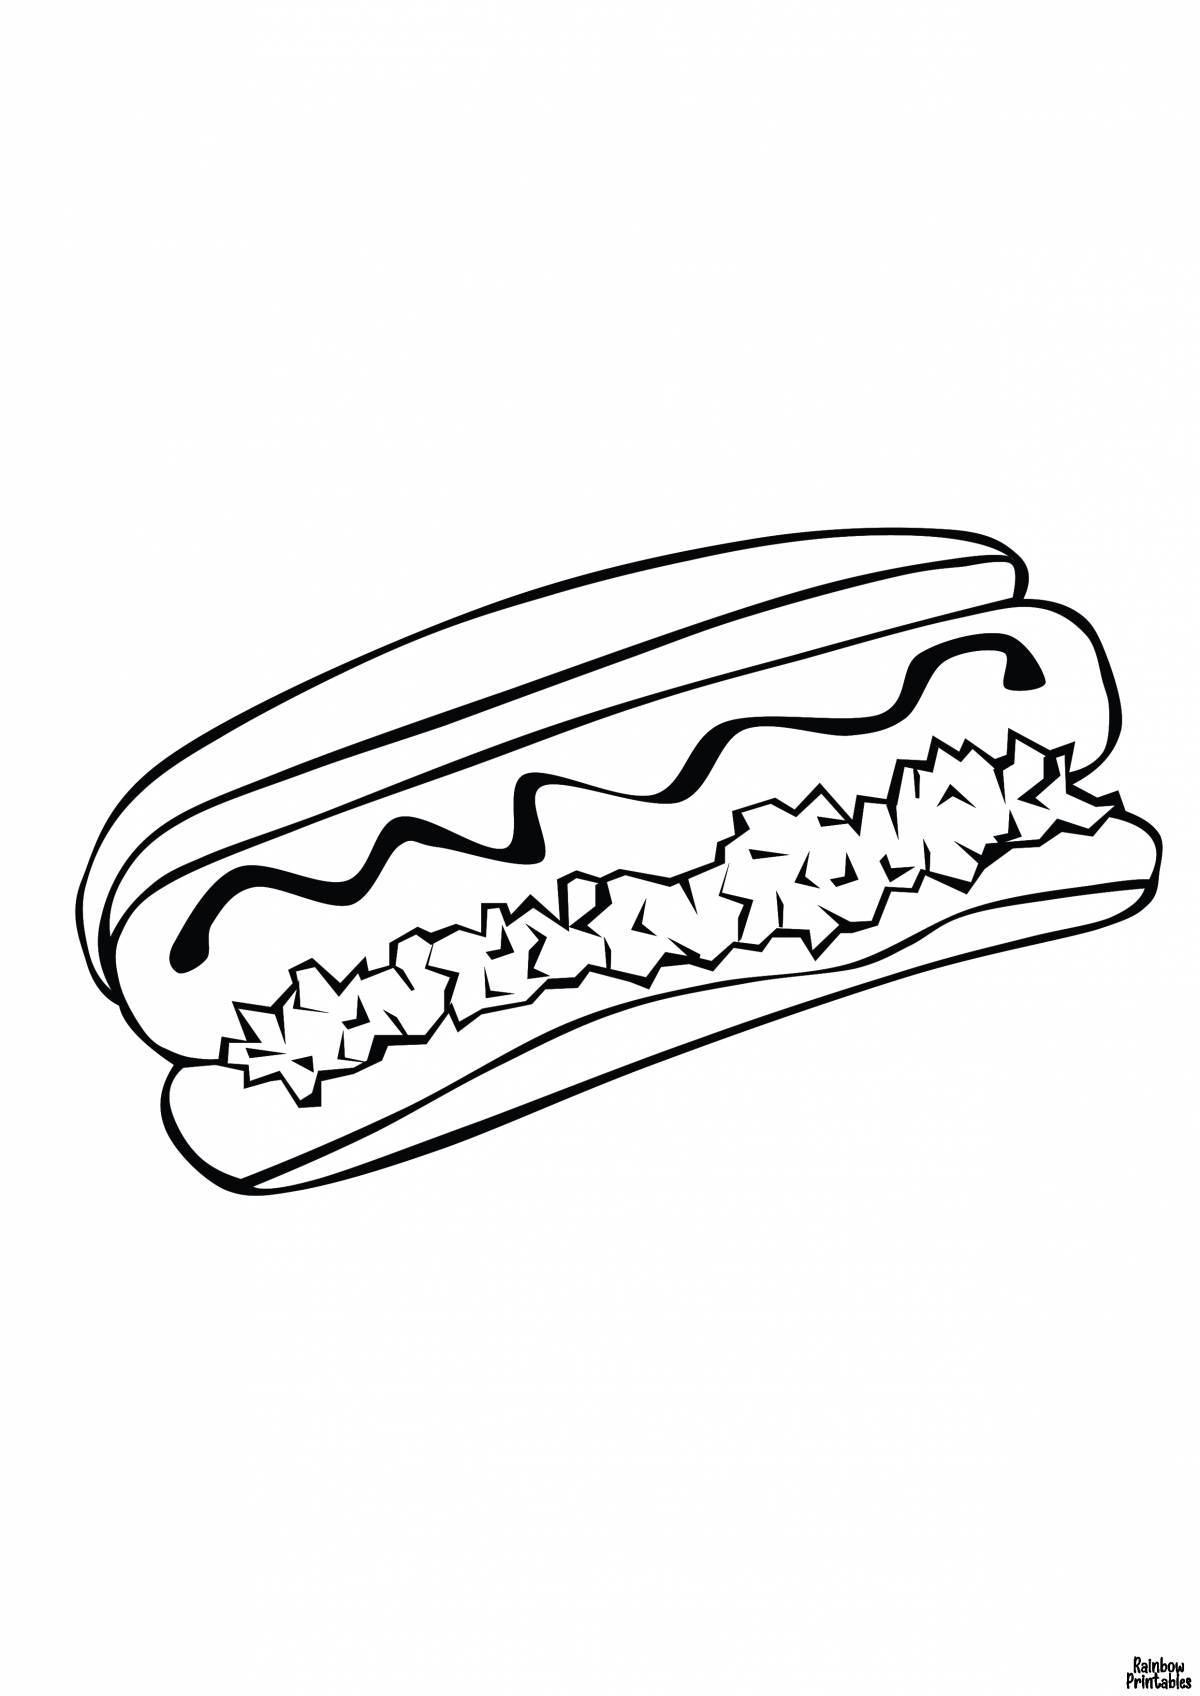 Colorful fast food coloring page